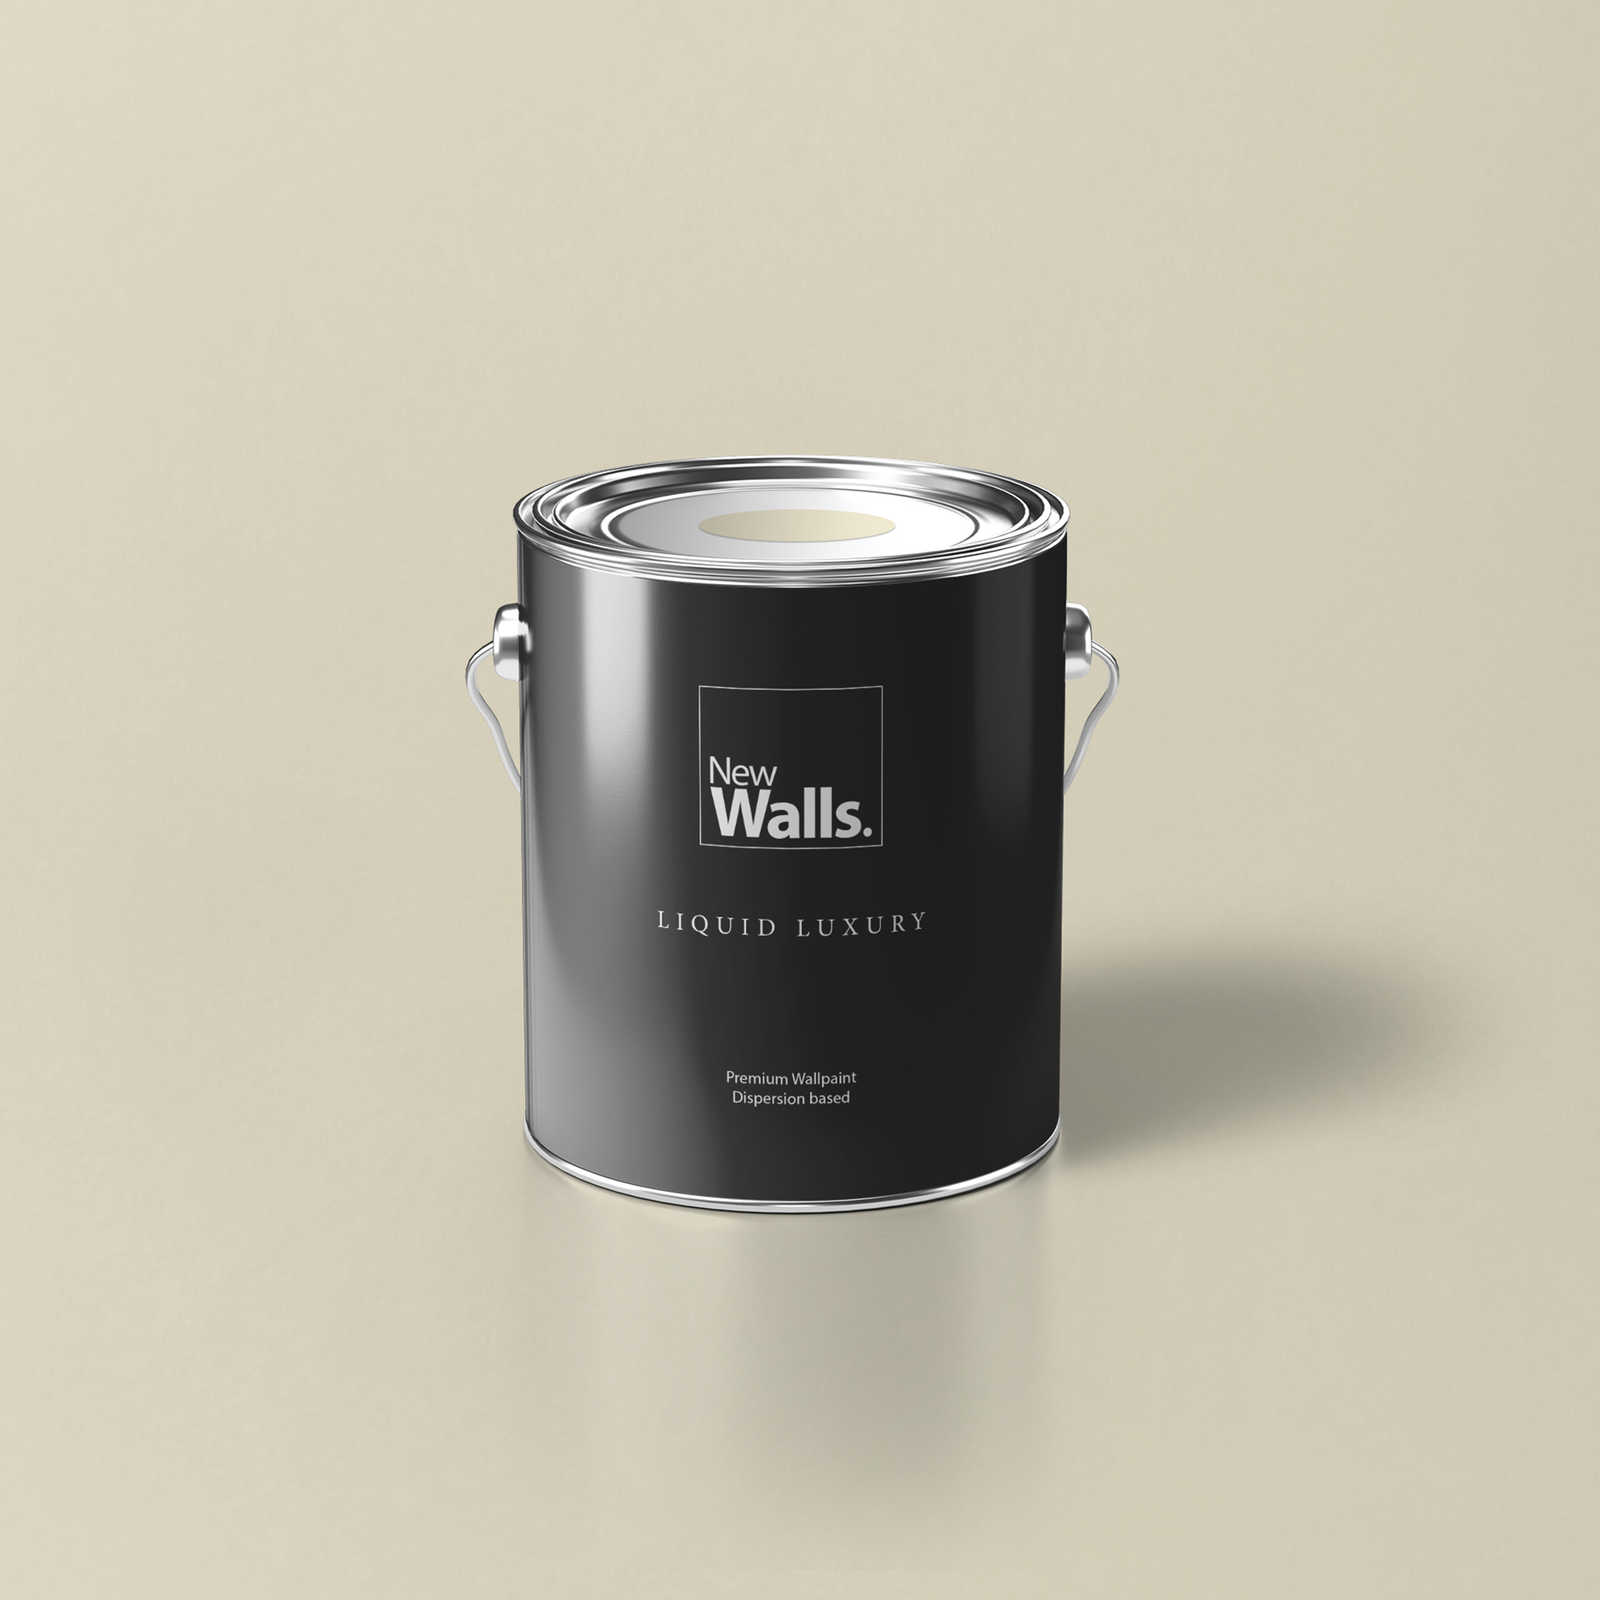 Premium Wall Paint serene champagne »Lucky Lime« NW600 – 2,5 litre
